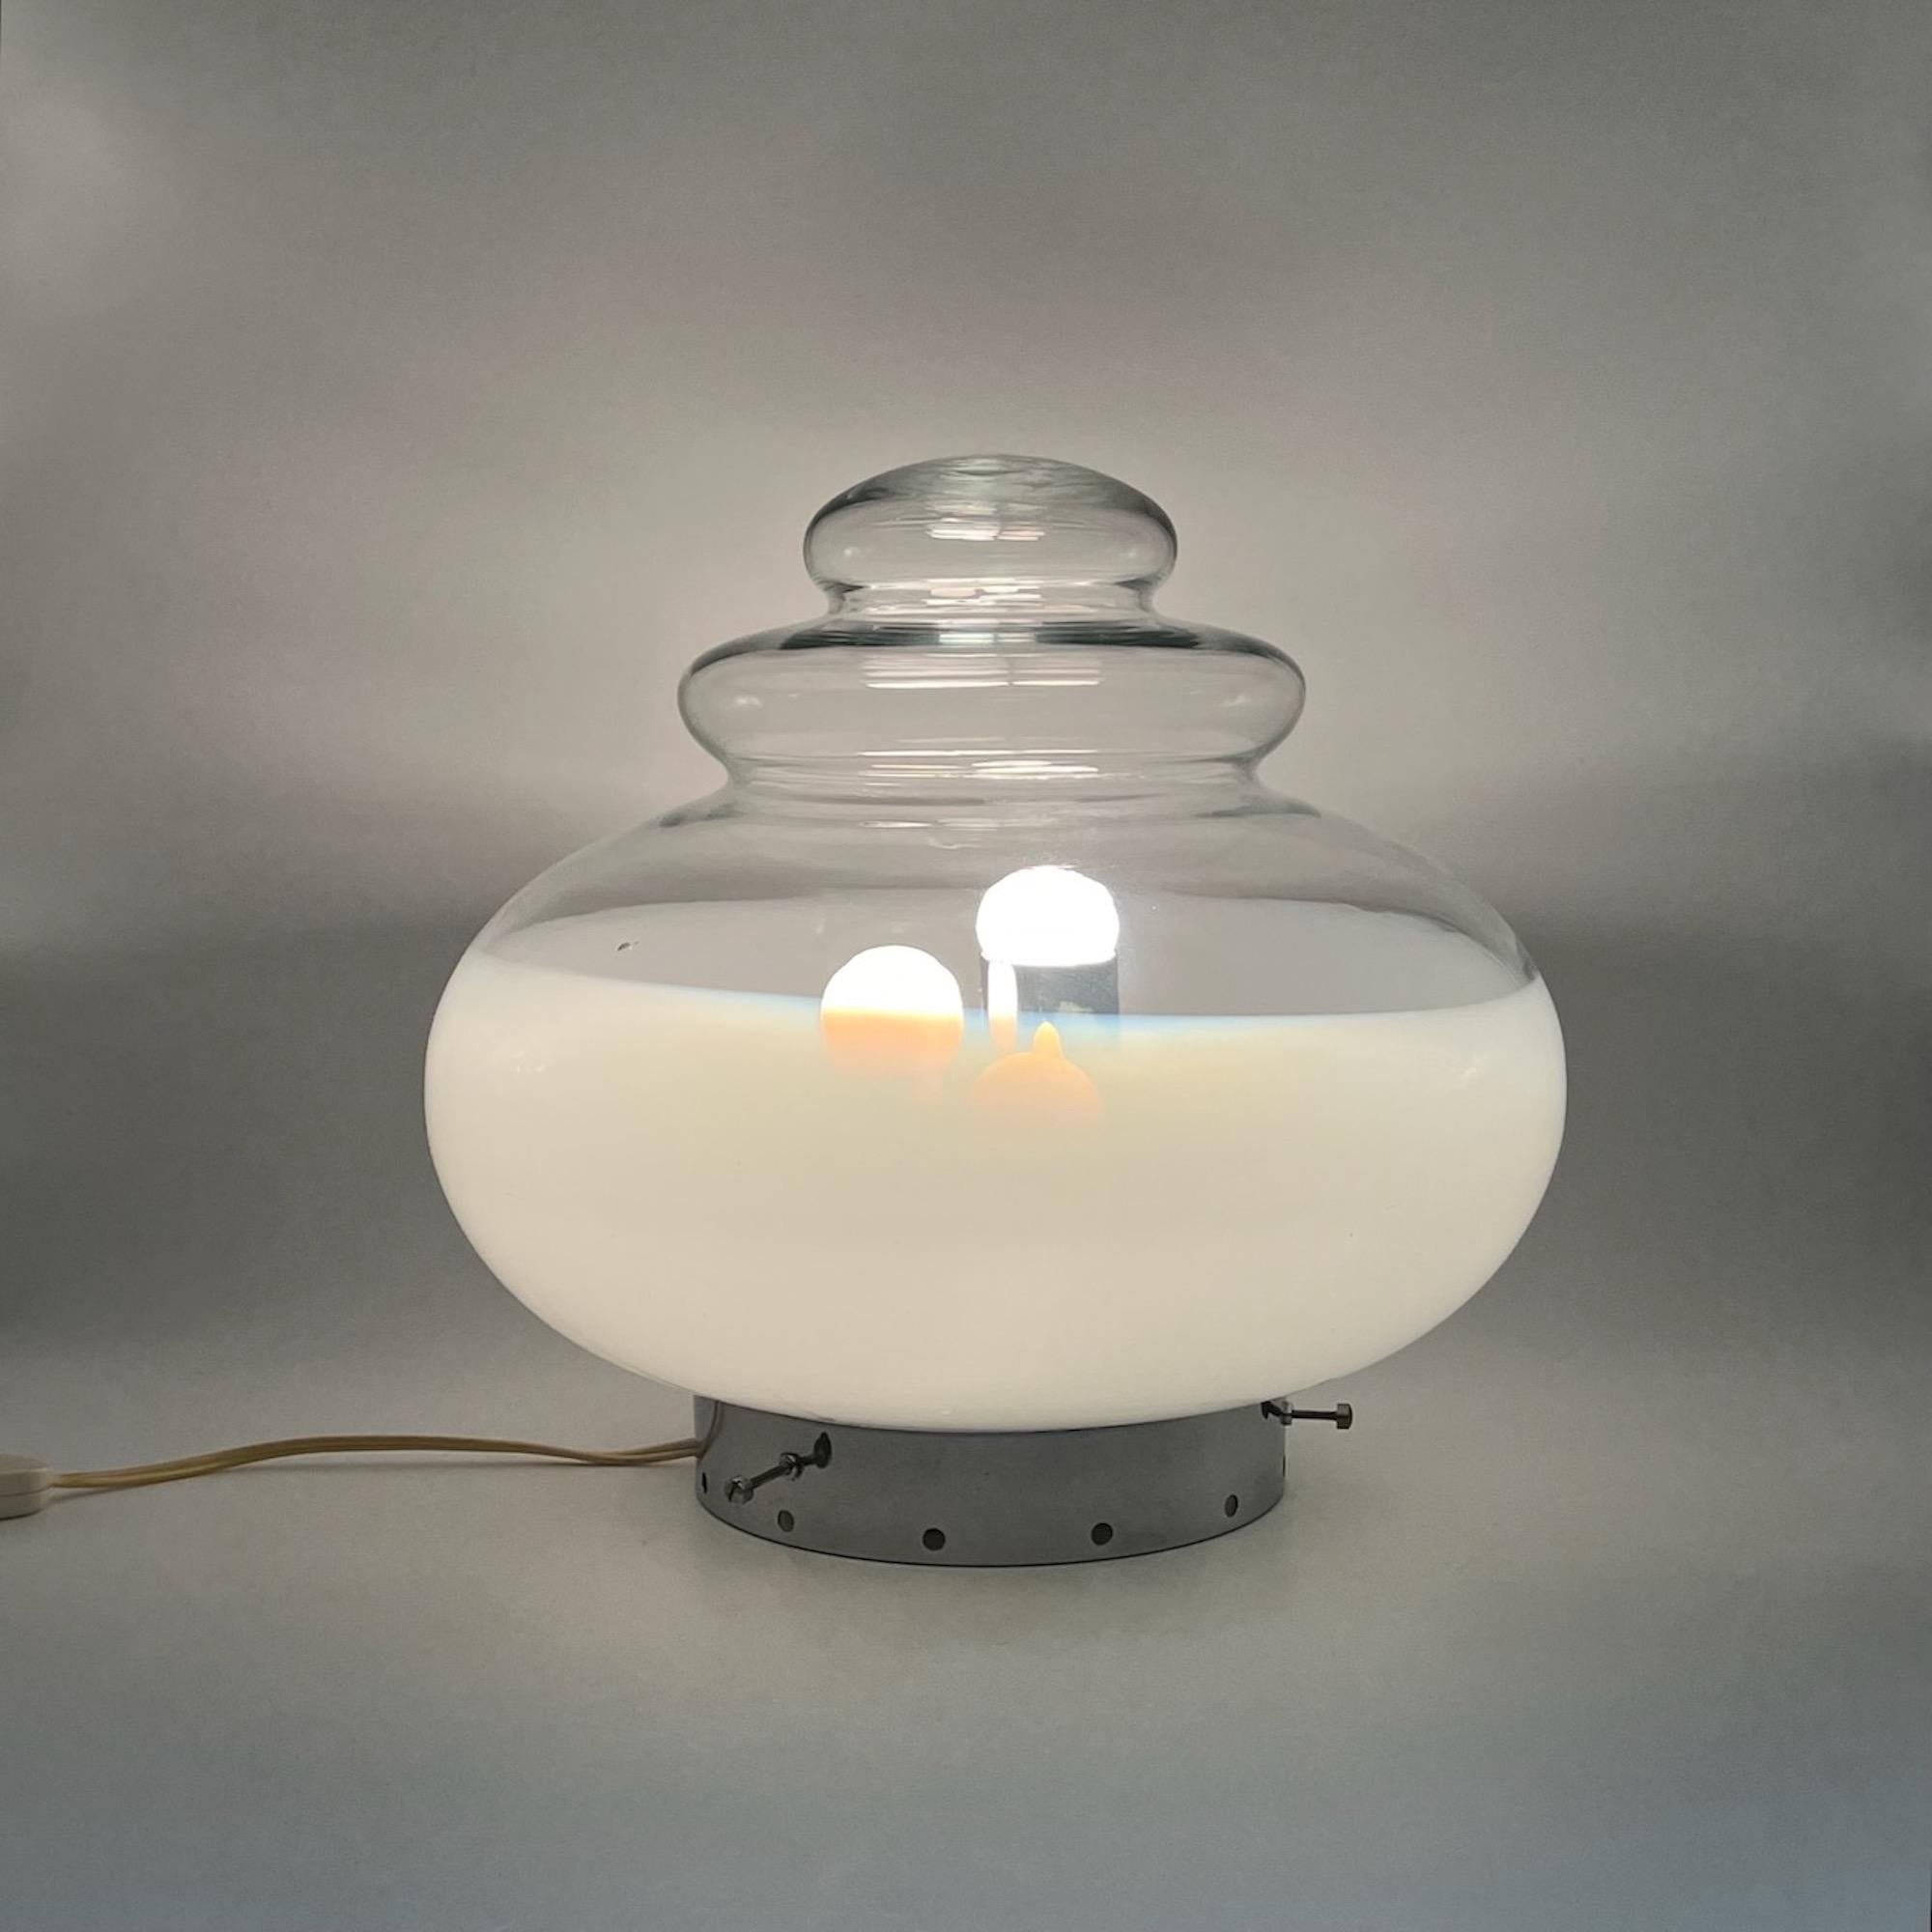 Mid-20th Century Amazing Space Age 'UFO' Flying Saucer Table Lamp in Glass and Metal, Italy 1960s For Sale